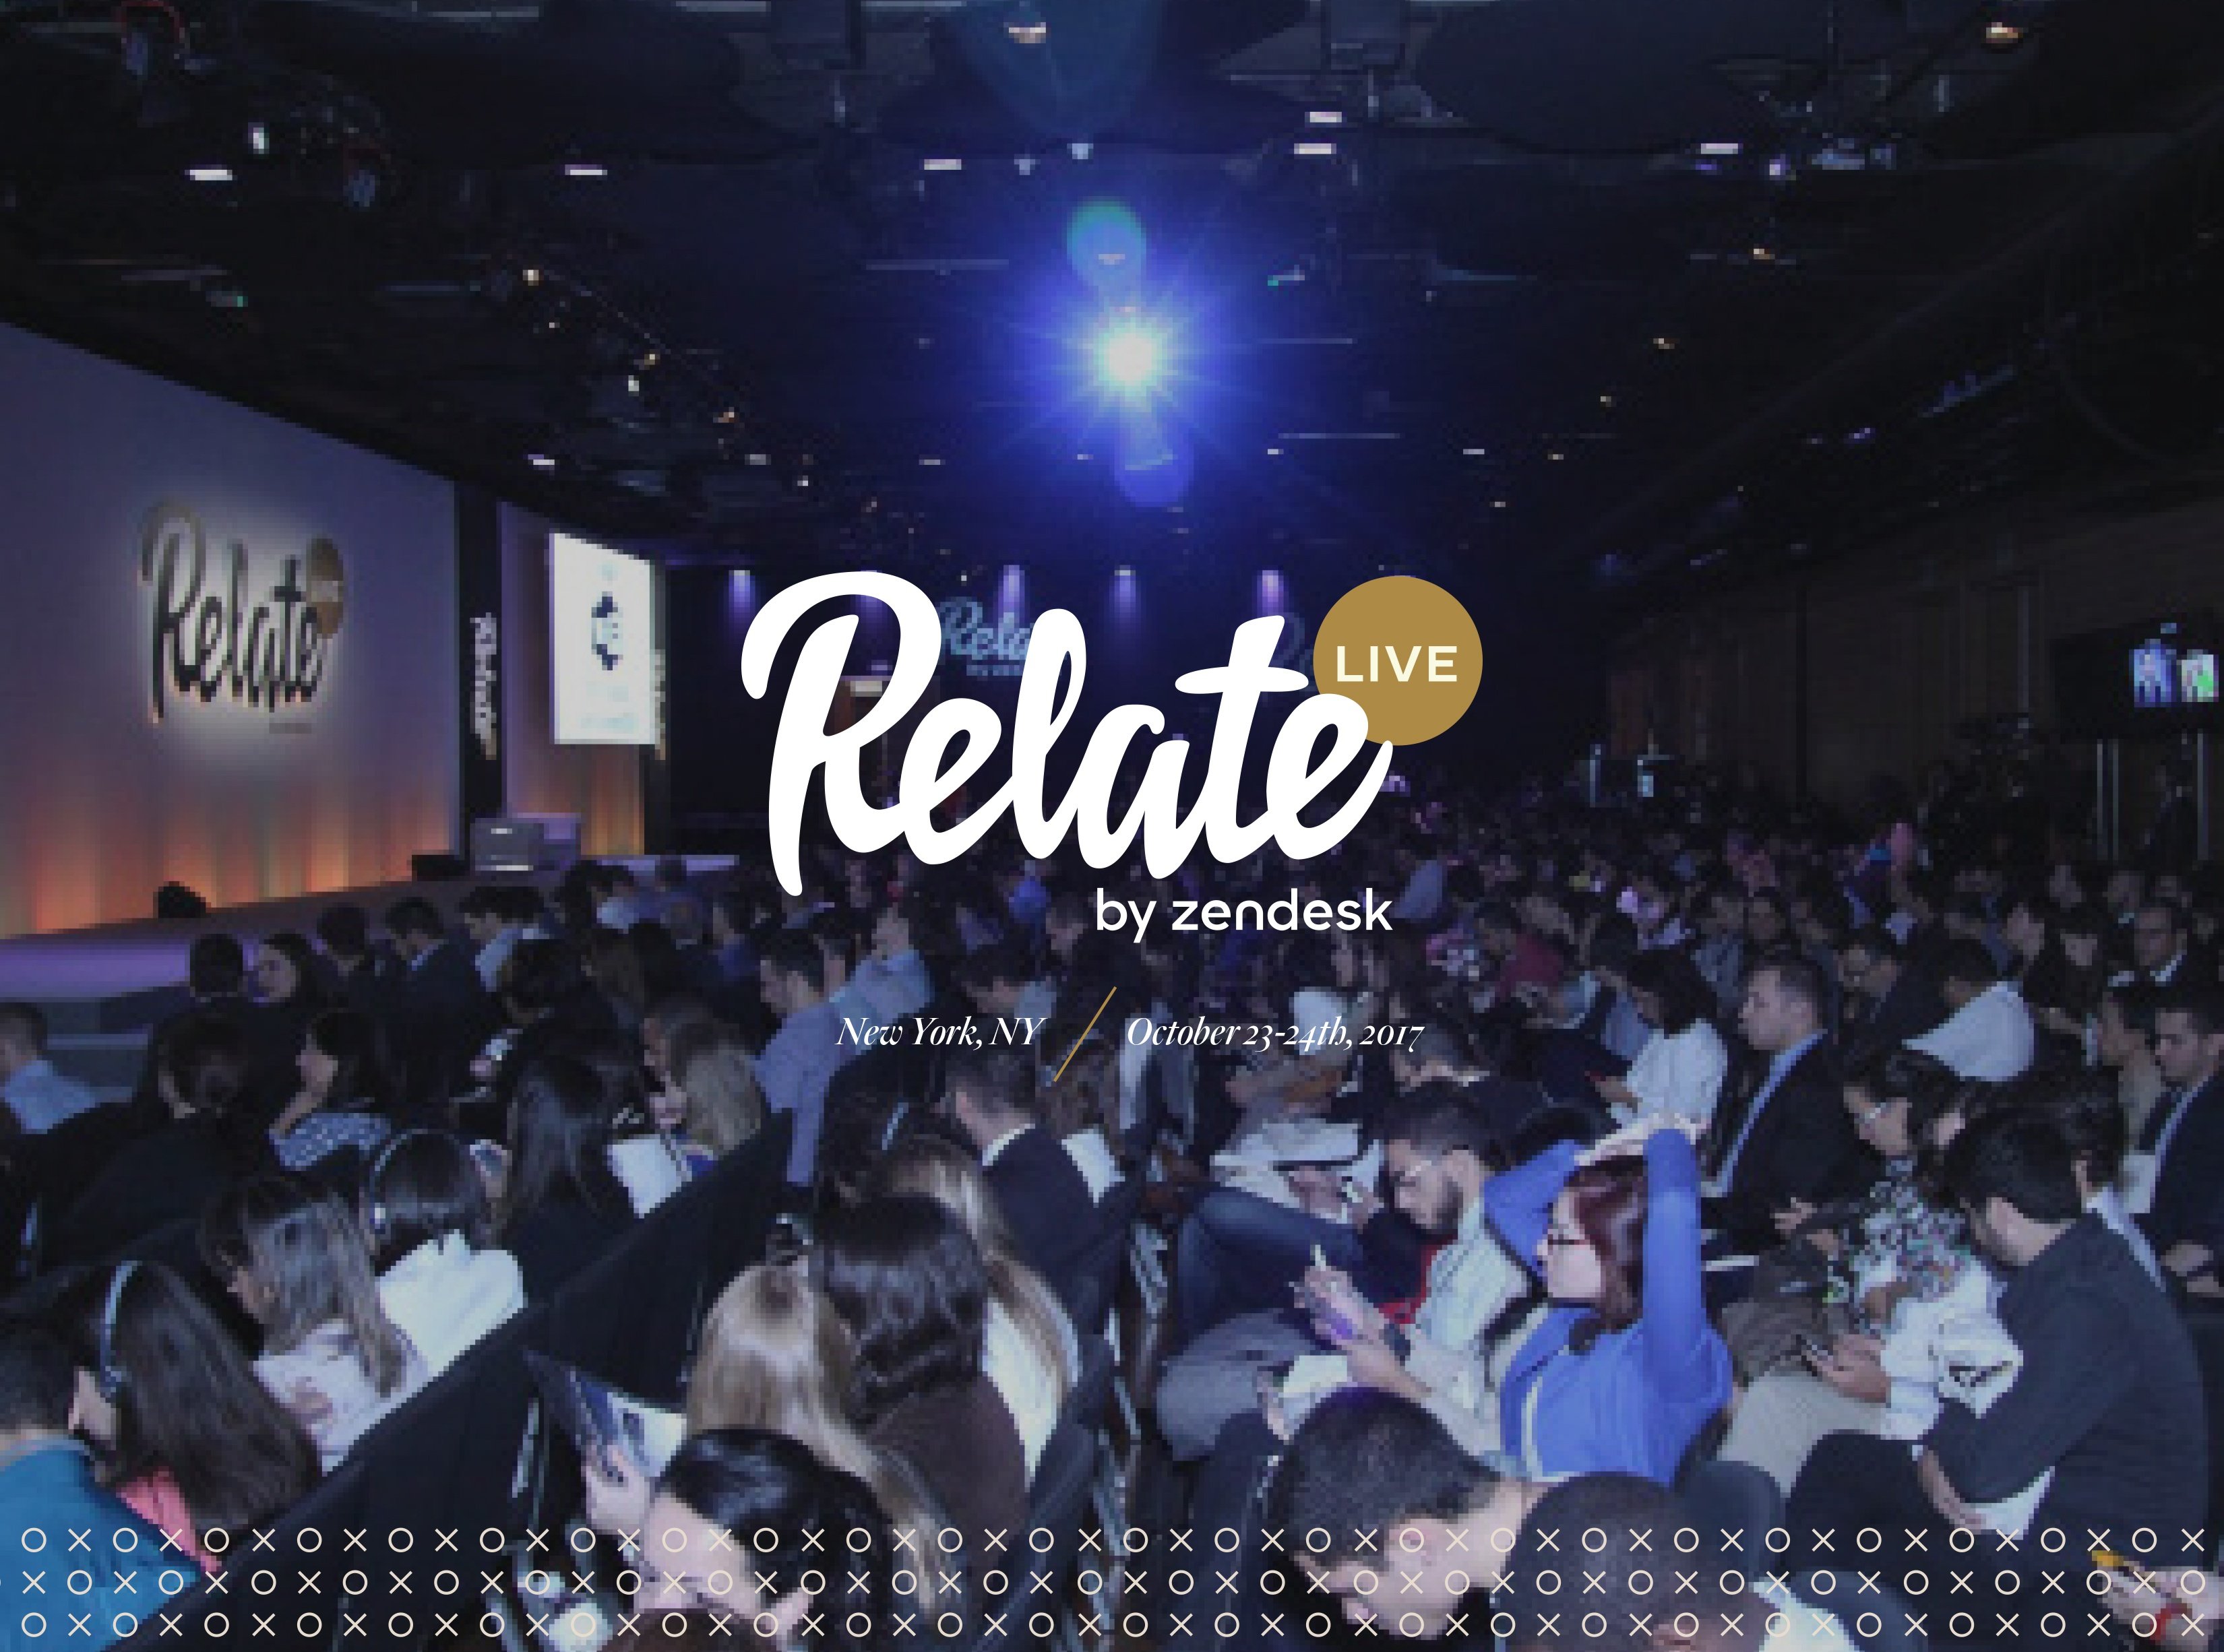 Zendesk RelateLive Topics and Trends at this Years Conference!